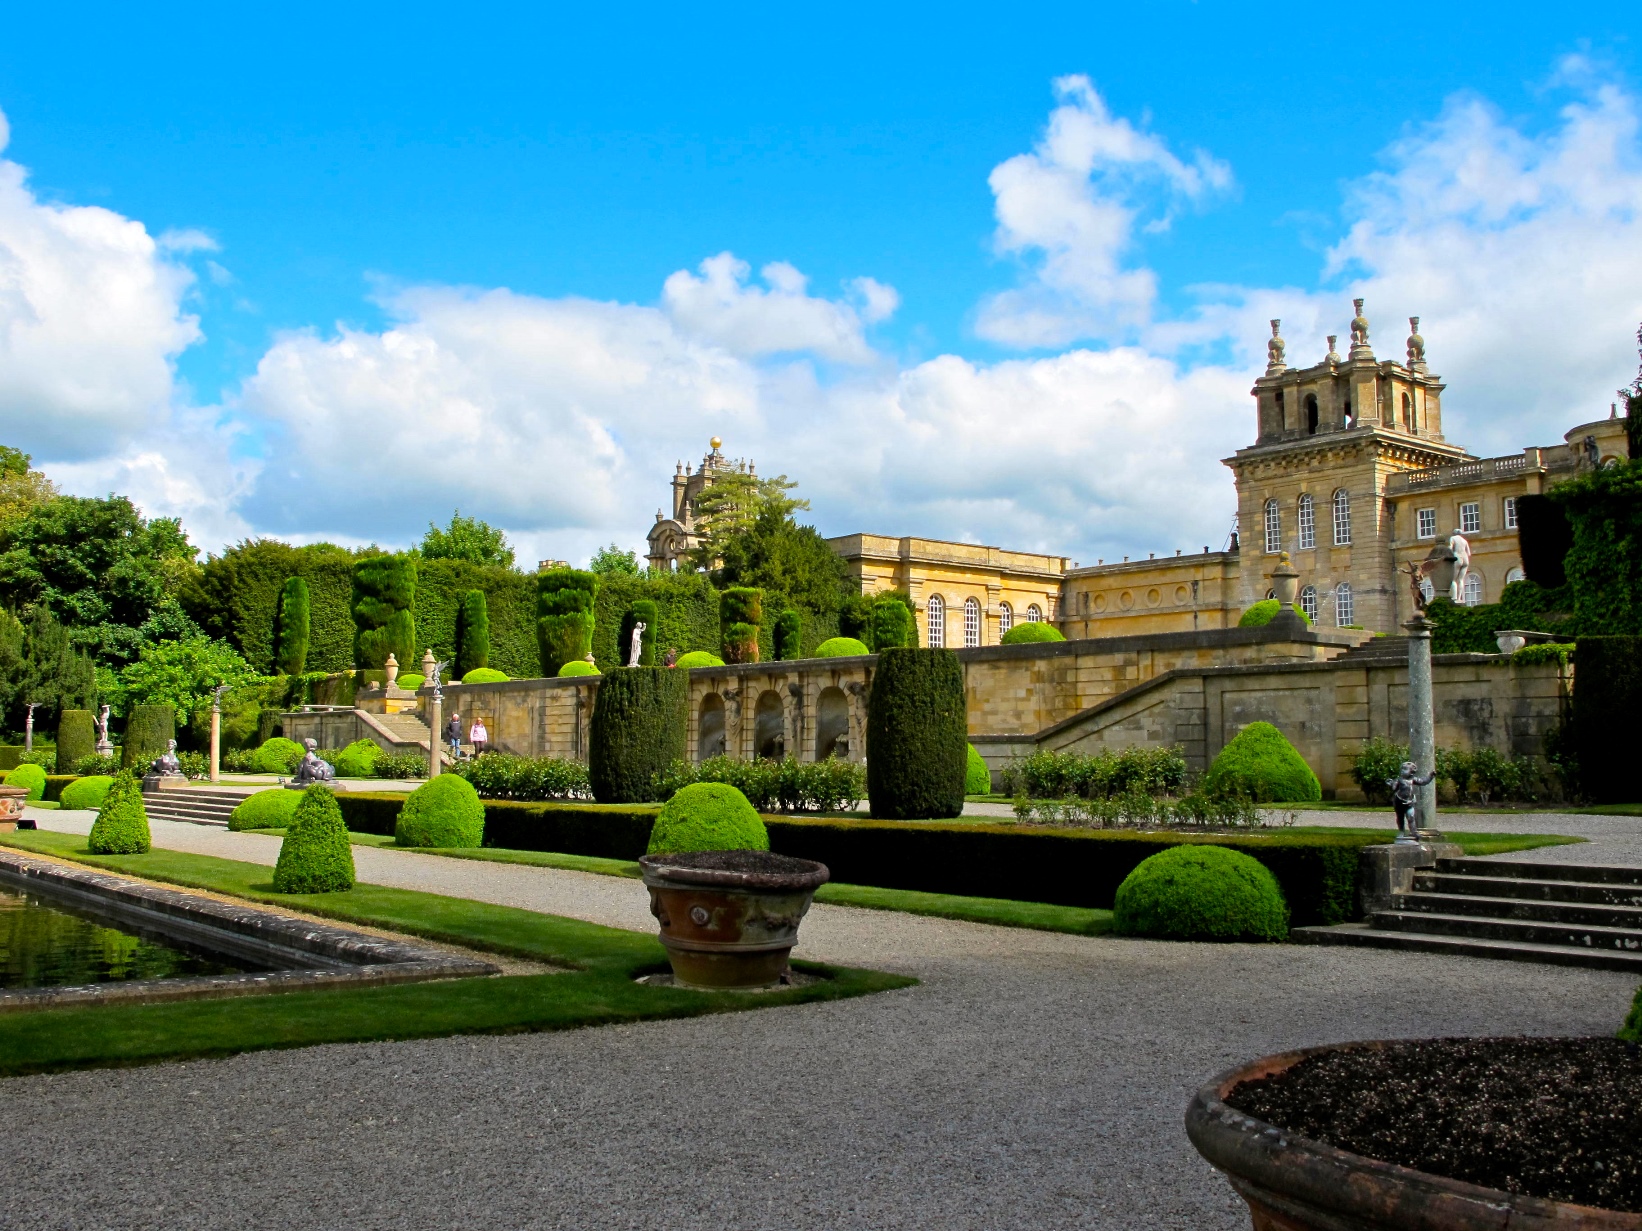 Blenheim Palace in England